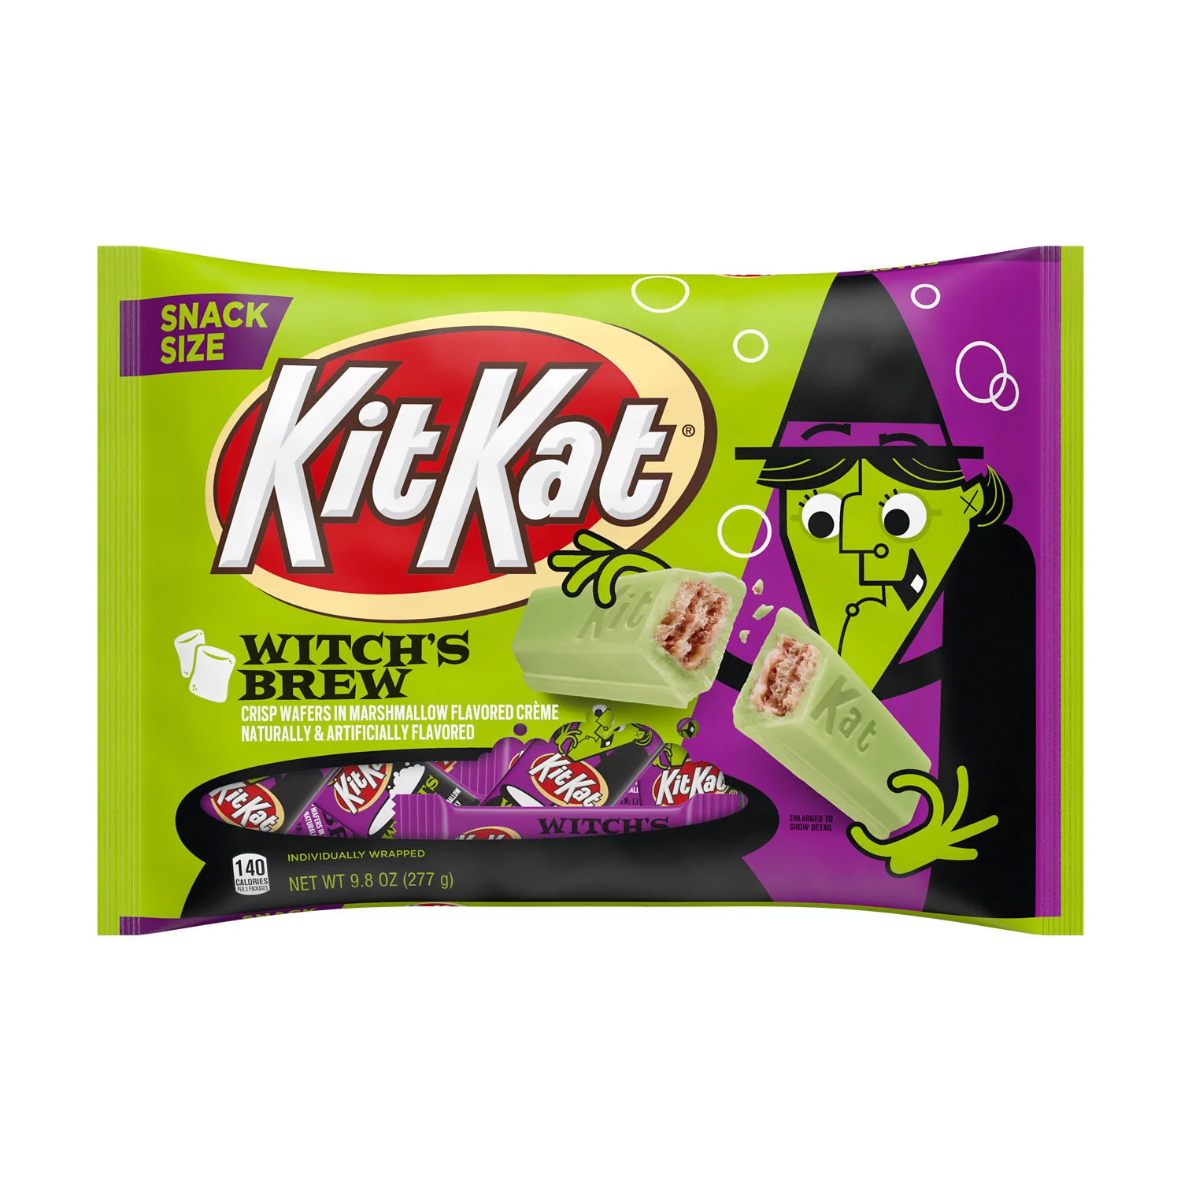 Kit Kat Witch's Brew Marshmallow Creme Snack Size, Halloween Wafer Candy Bars Bag, 9.8 oz